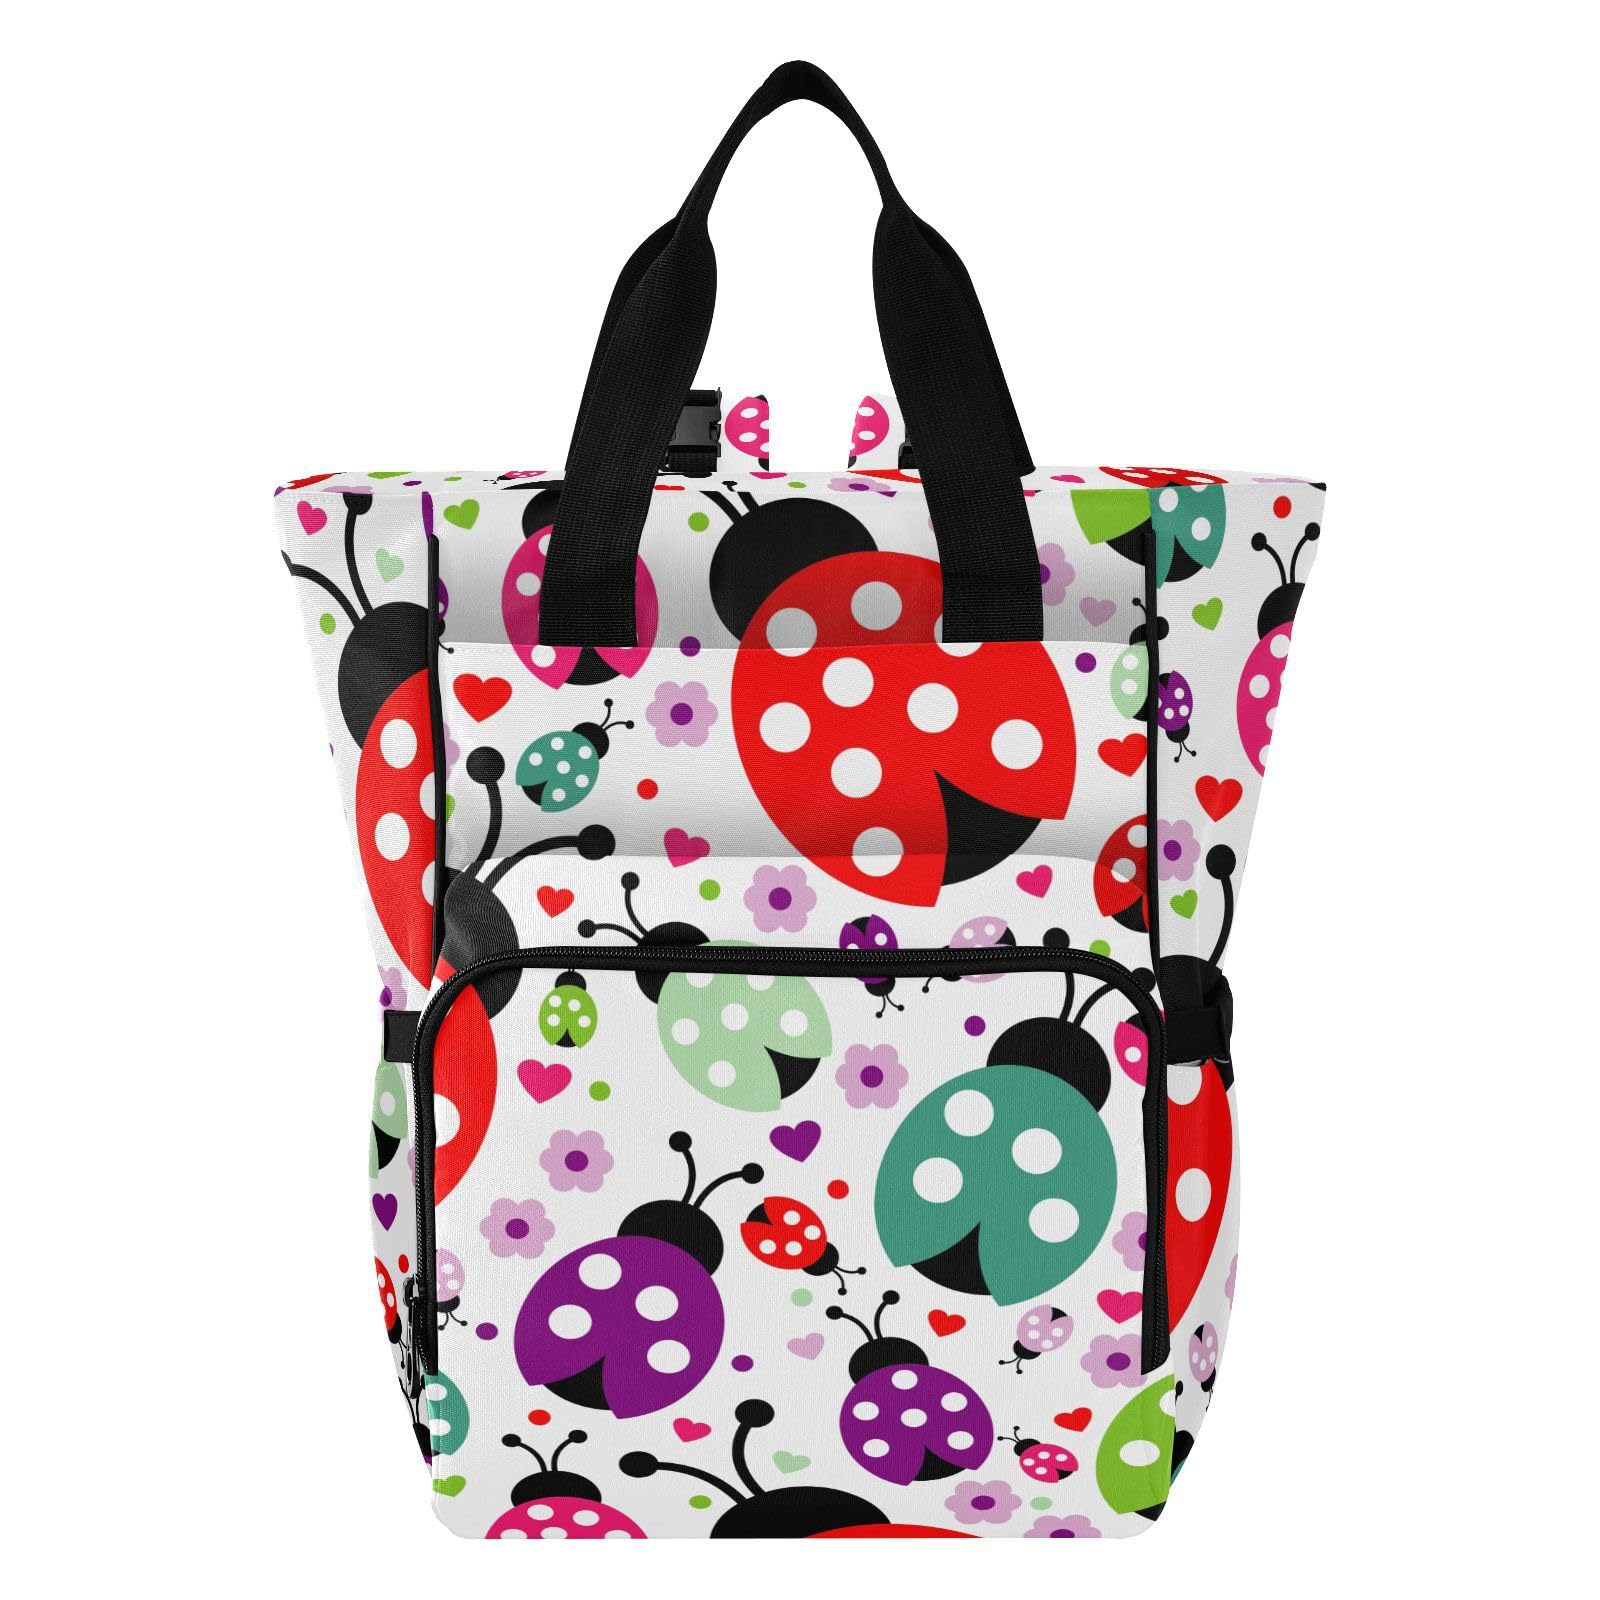 innewgogo Colorful Ladybird Polka Dot Diaper Bag Backpack for Baby Girl Boy Large Capacity Baby Changing Totes with Three Pockets Multifunction Baby Essentials for Travelling Picnicking